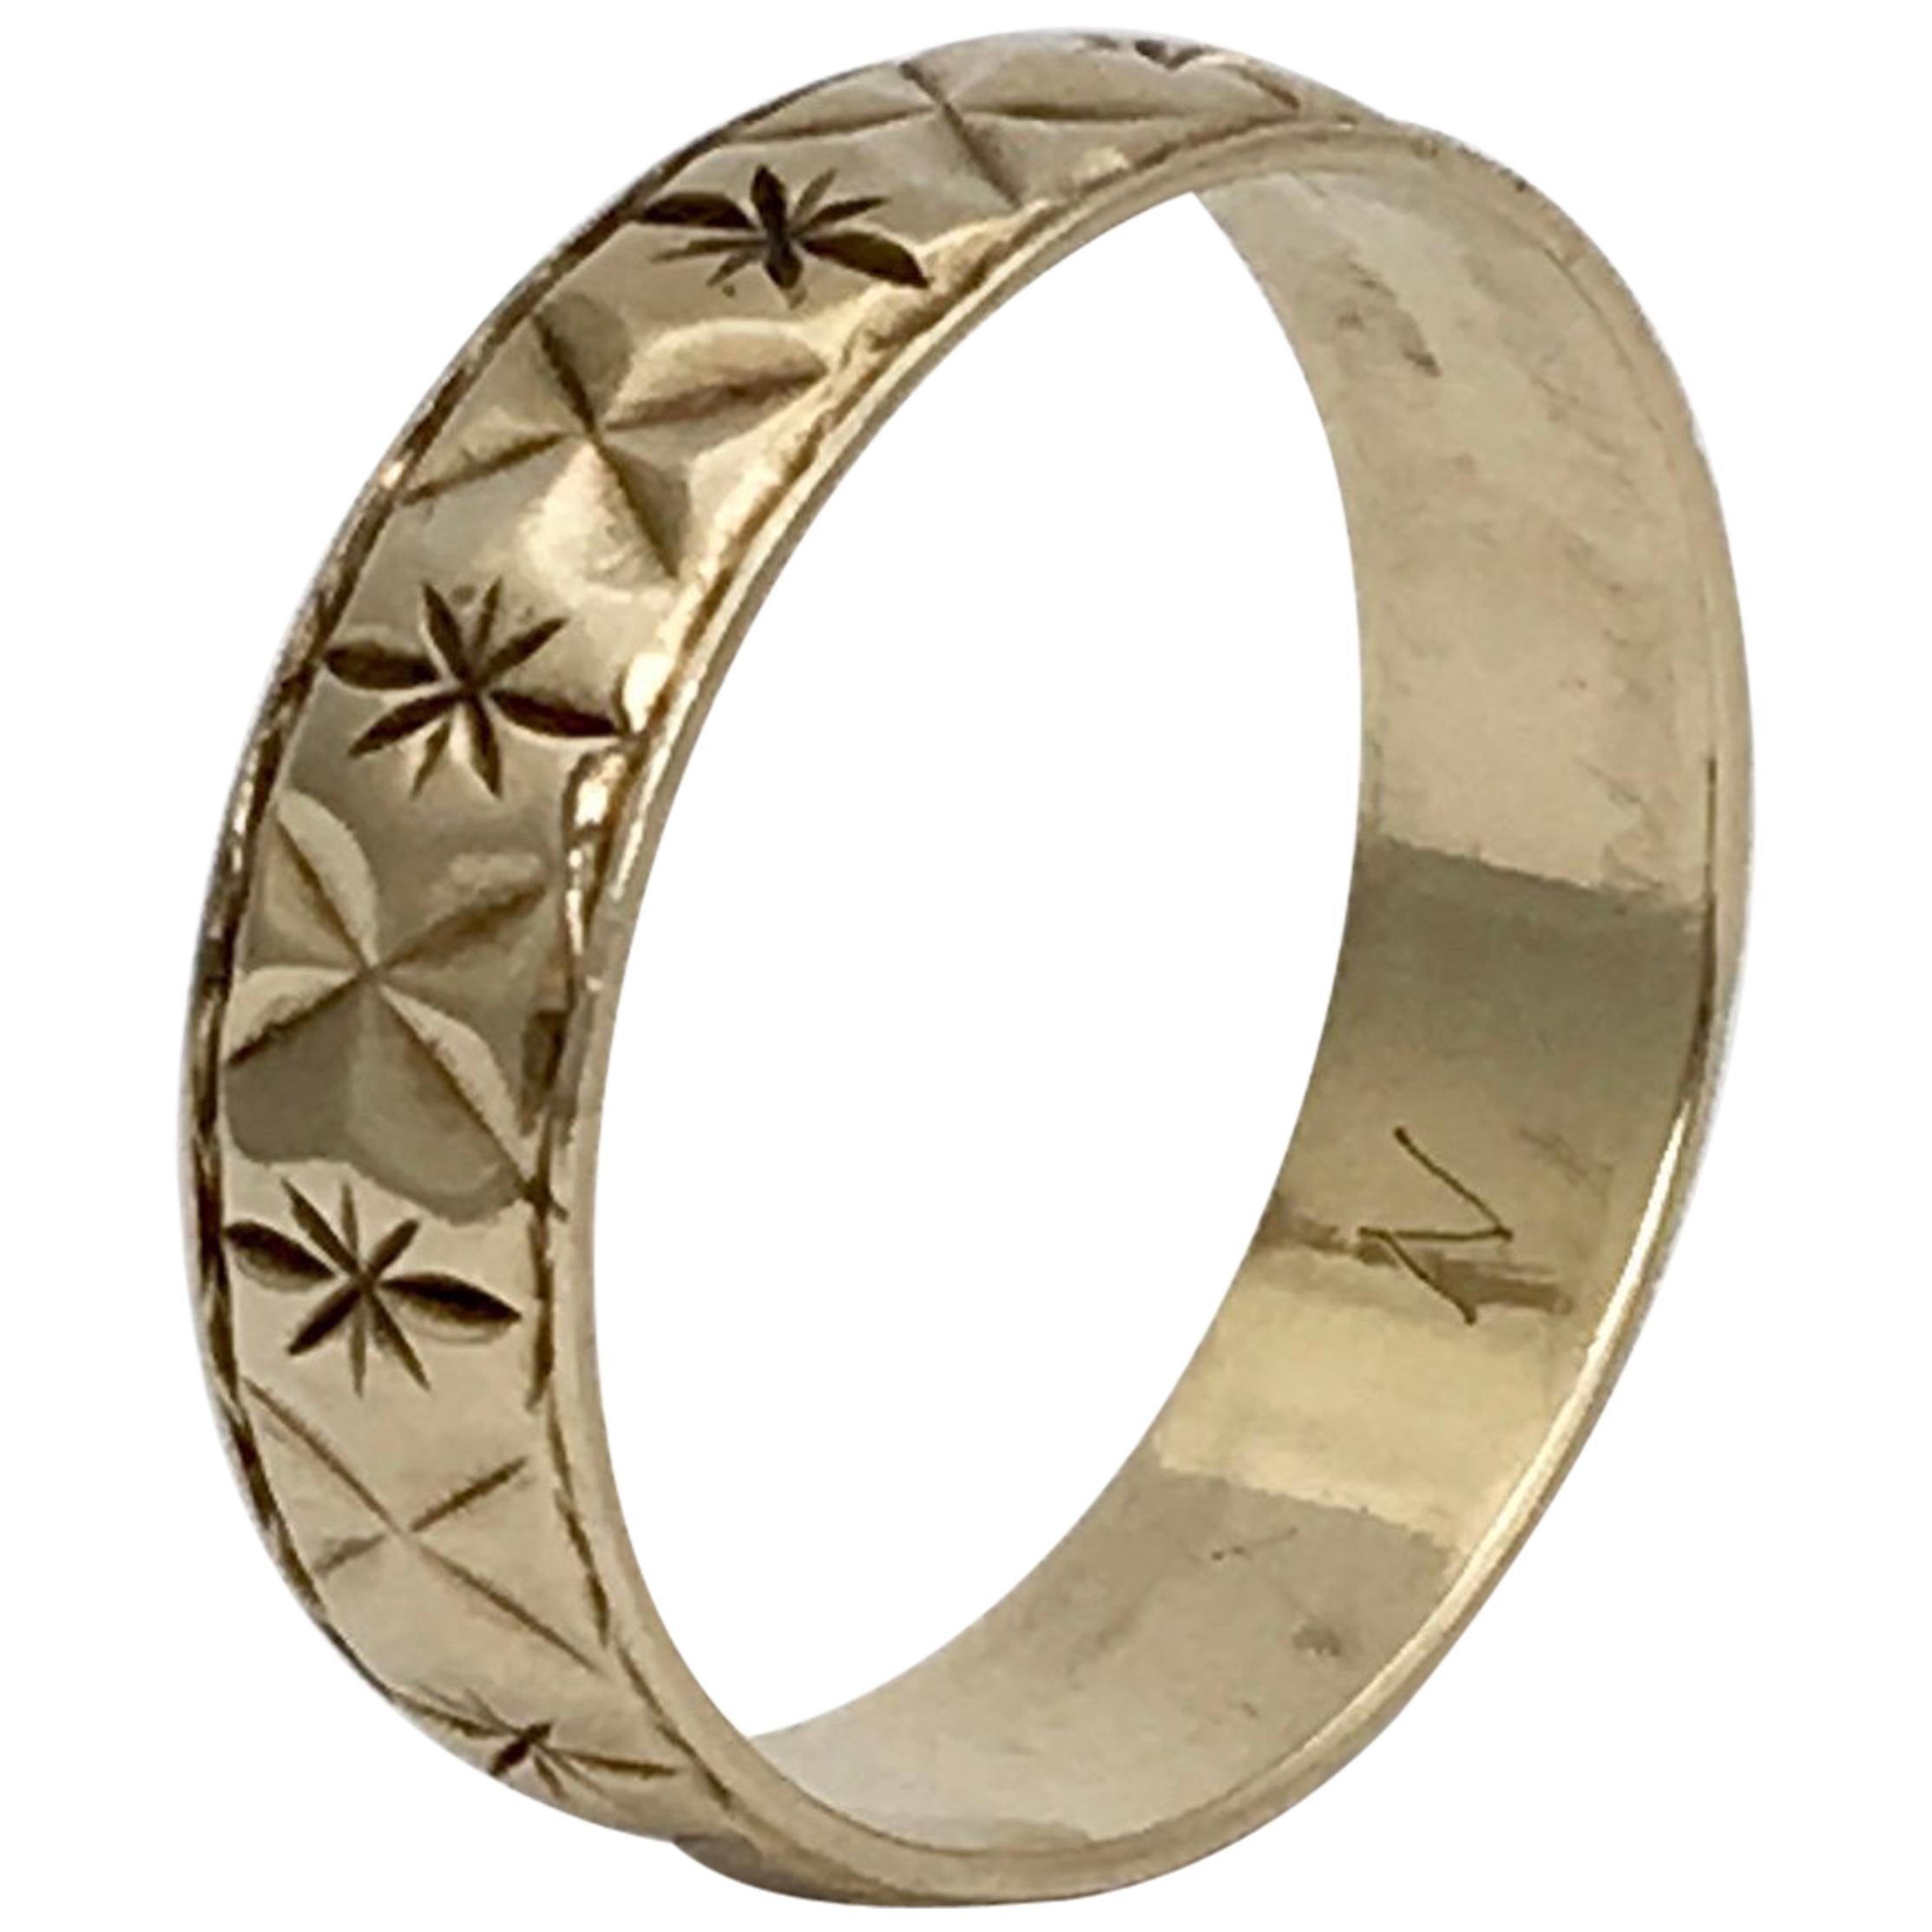 Gold Vintage Jewelry Engraved Stars Wedding Band Stacking Ring English, 1980s